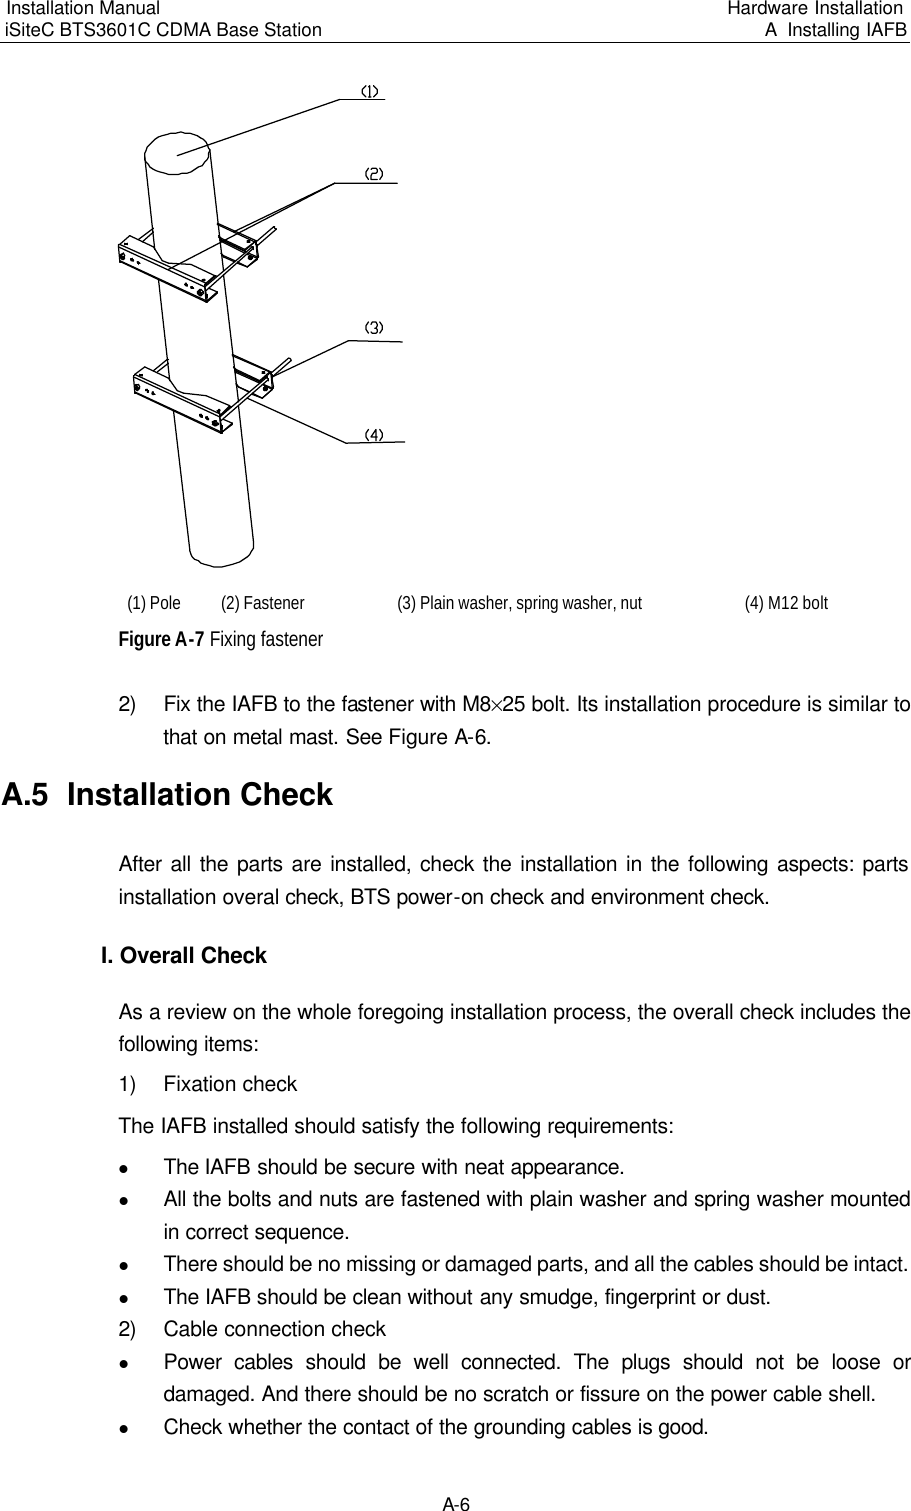 Installation Manual   iSiteC BTS3601C CDMA Base Station Hardware Installation A  Installing IAFB  A-6 　(1) Pole　(2) Fastener　(3) Plain washer, spring washer, nut　(4) M12 bolt　Figure A-7 Fixing fastener　2) Fix the IAFB to the fastener with M8%25 bolt. Its installation procedure is similar to that on metal mast. See Figure A-6.　A.5  Installation Check　After all the parts are installed, check the installation in the following aspects: parts installation overal check, BTS power-on check and environment check.　I. Overall Check　As a review on the whole foregoing installation process, the overall check includes the following items:　1) Fixation check　The IAFB installed should satisfy the following requirements:　l The IAFB should be secure with neat appearance.  l All the bolts and nuts are fastened with plain washer and spring washer mounted in correct sequence.　l There should be no missing or damaged parts, and all the cables should be intact.　l The IAFB should be clean without any smudge, fingerprint or dust.　2) Cable connection check　l Power cables should be well connected. The plugs should not be loose or damaged. And there should be no scratch or fissure on the power cable shell.　l Check whether the contact of the grounding cables is good.　